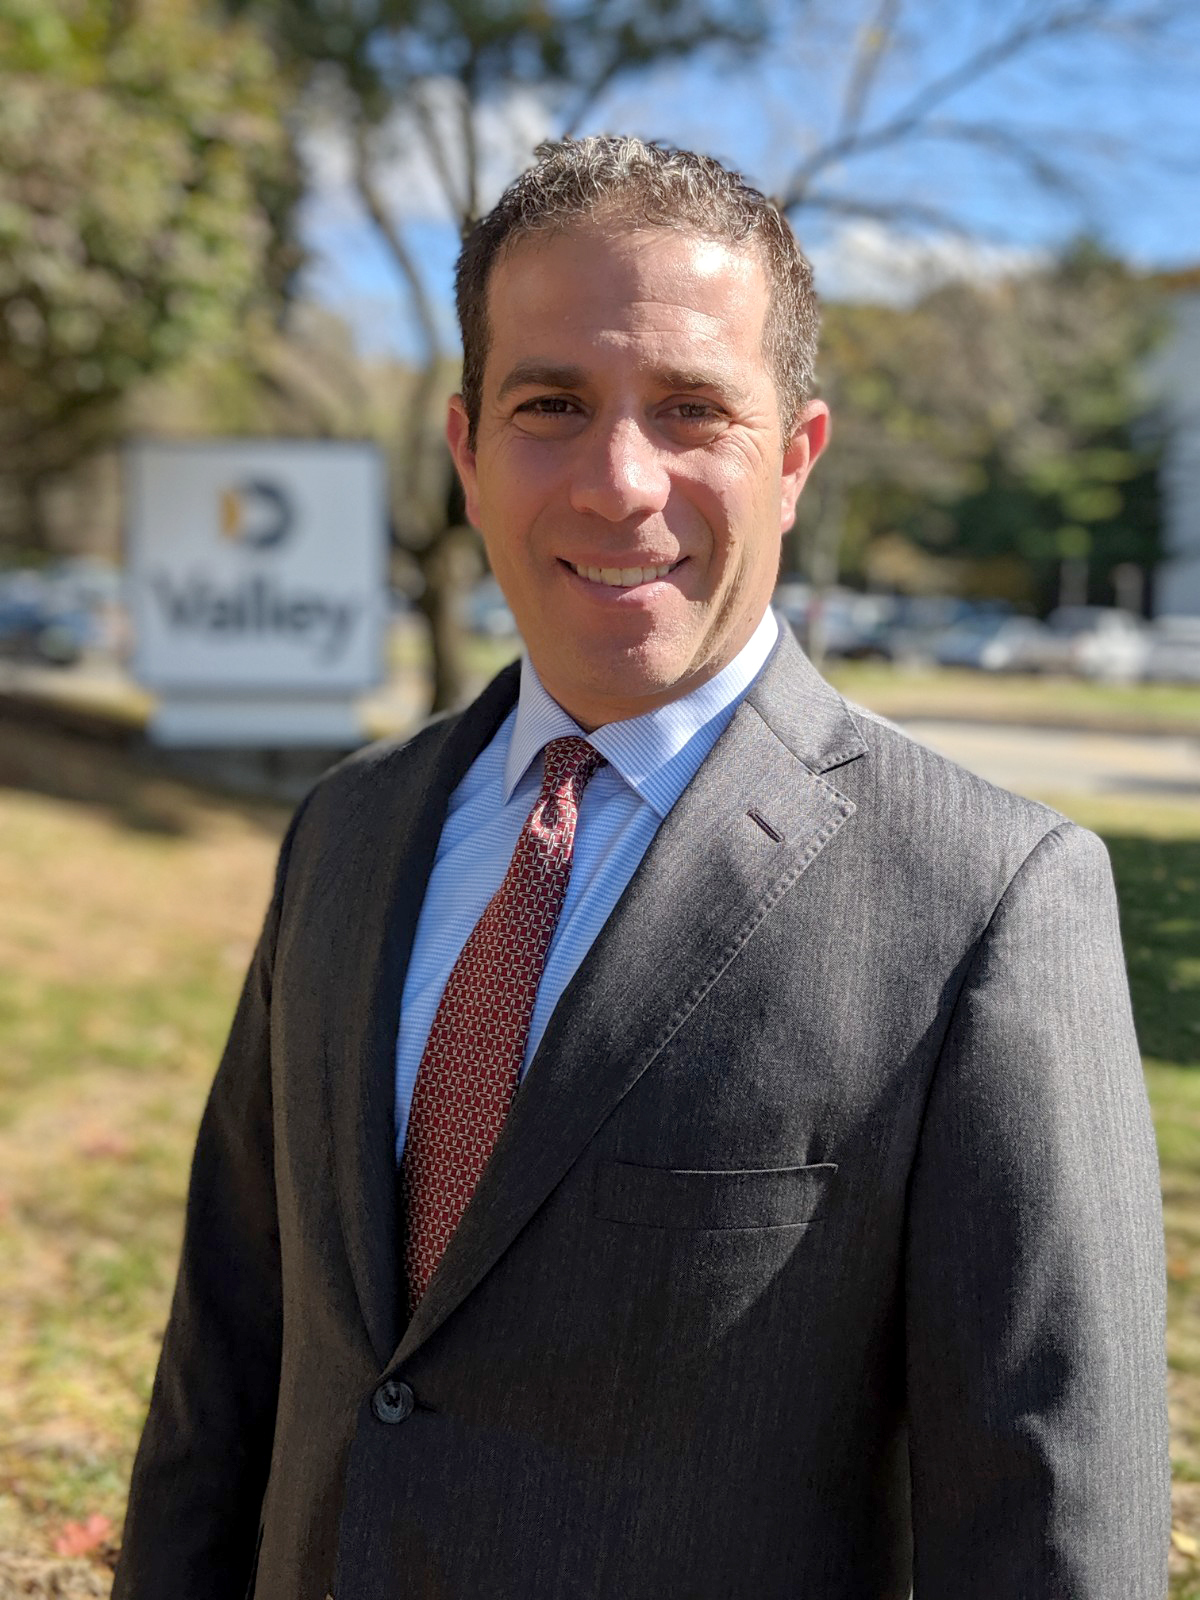 Valley Bank President and CEO Ira Robbins. Courtesy photo.